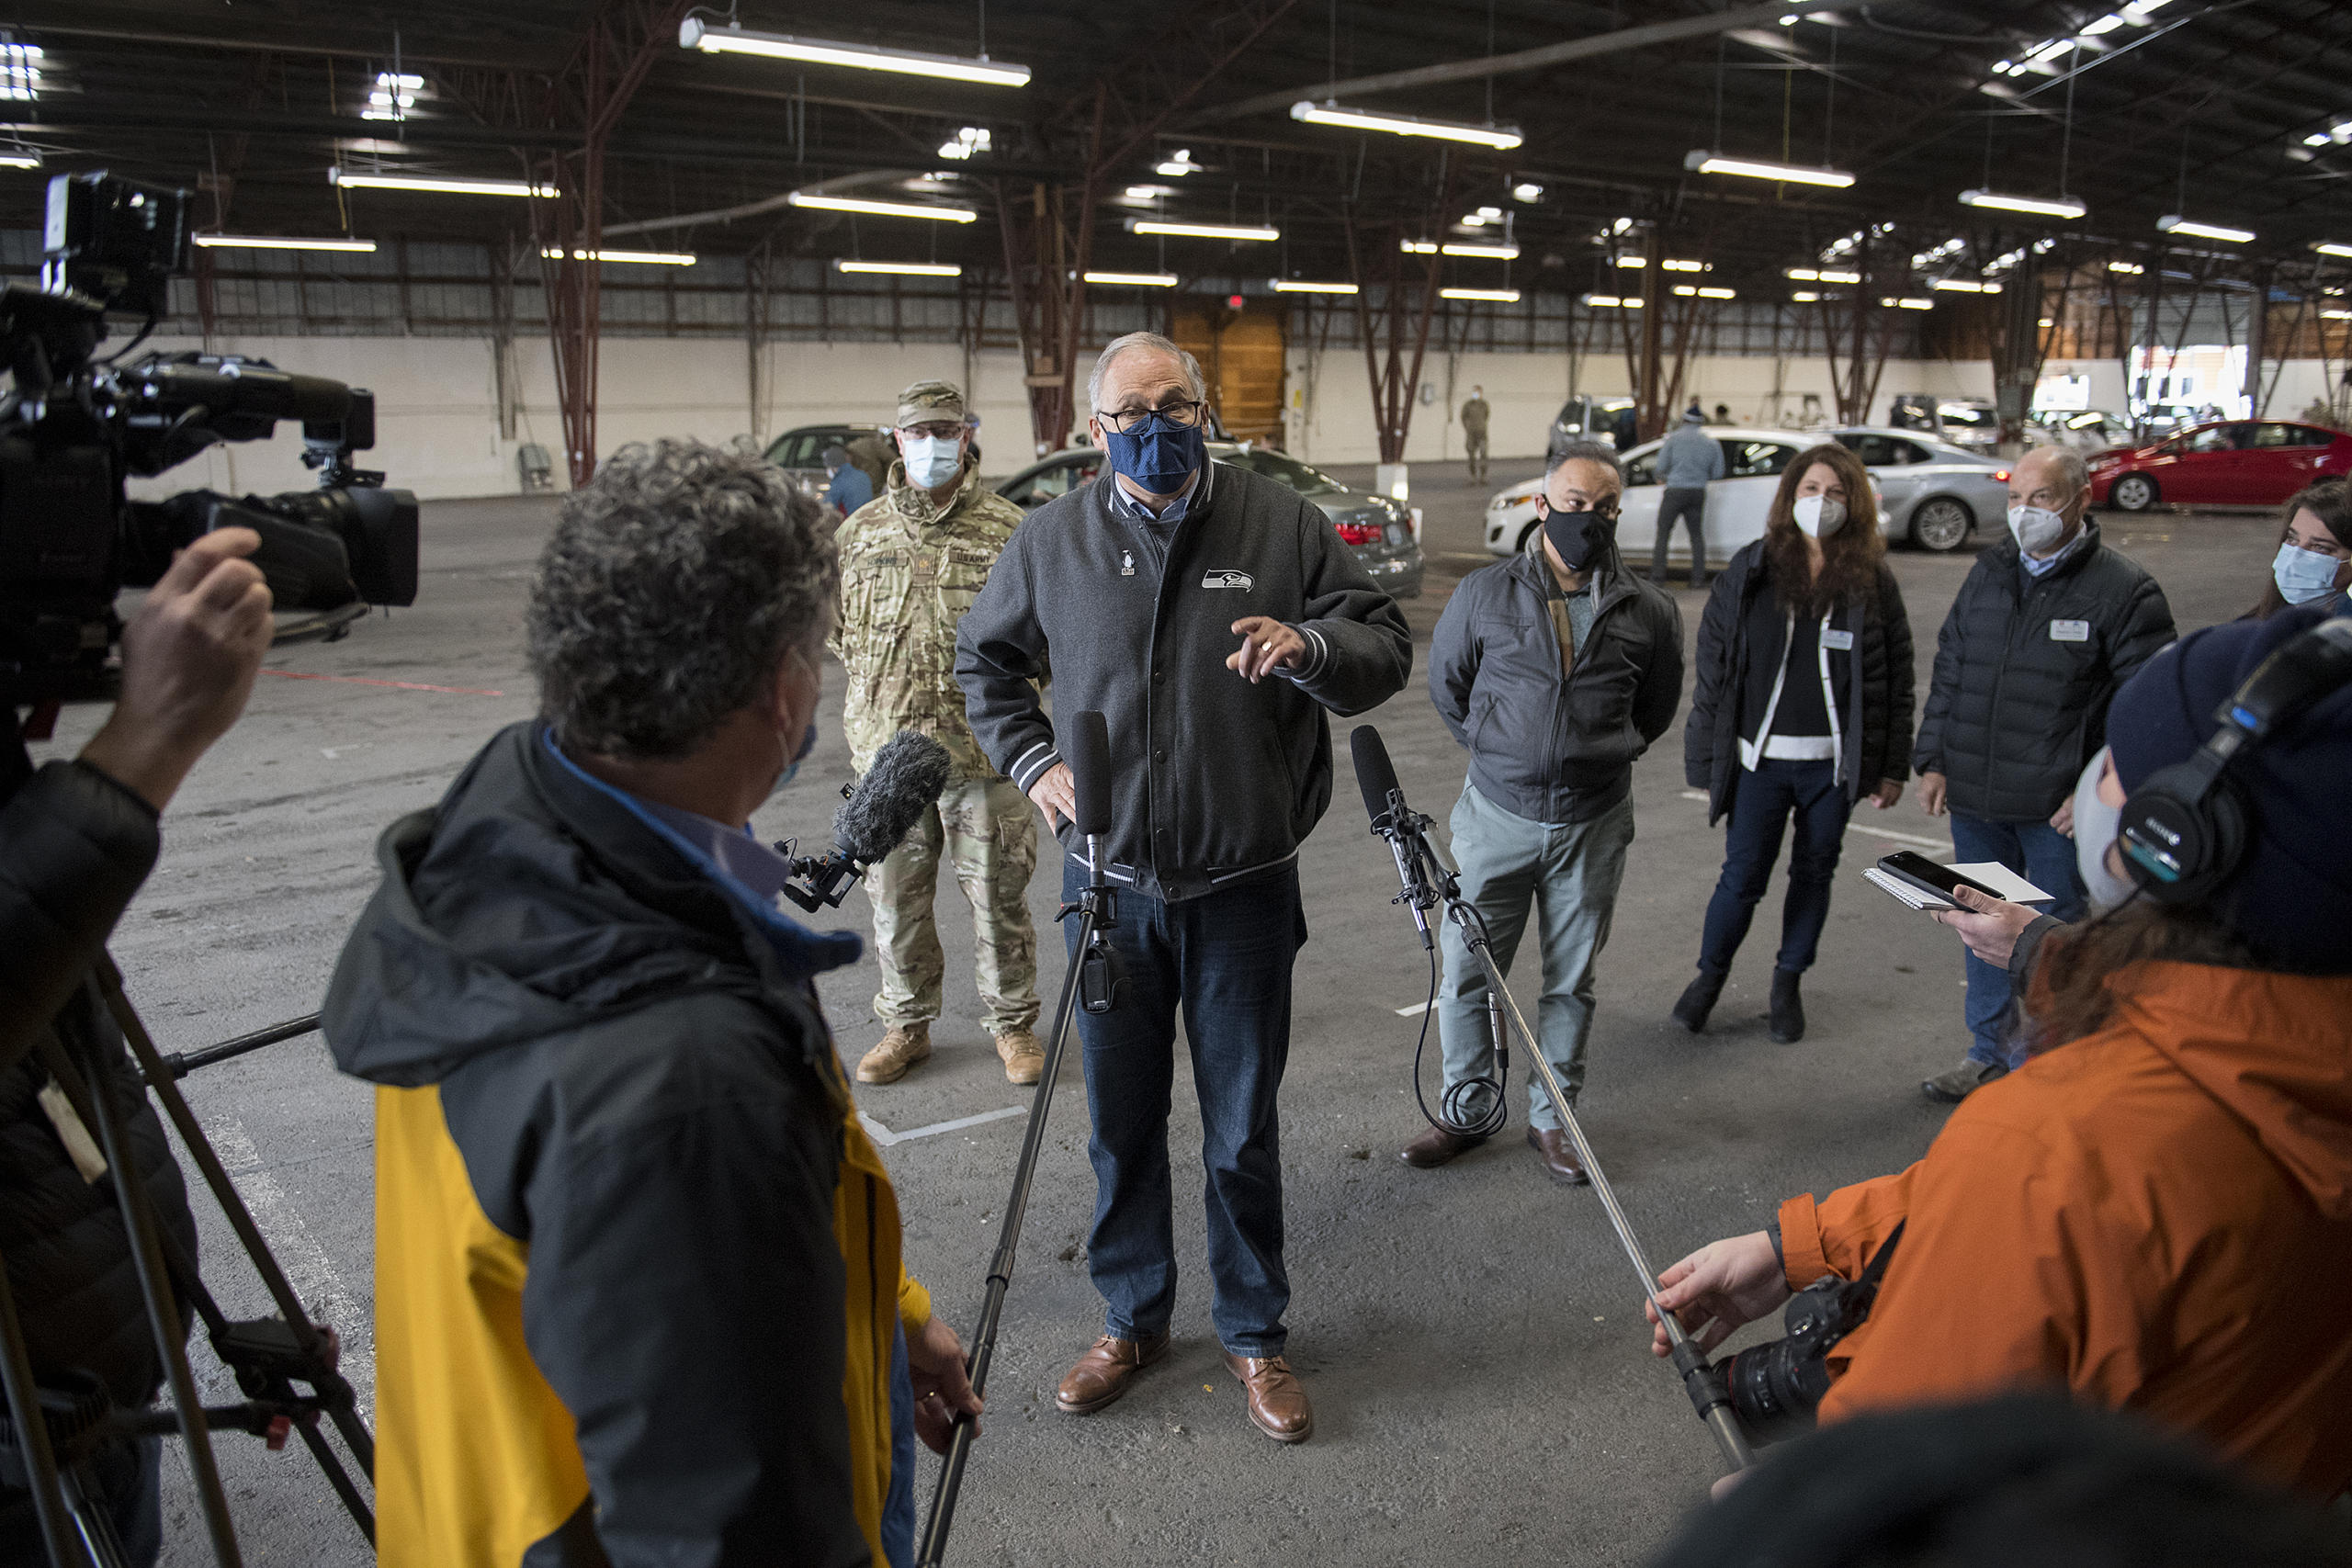 Gov. Jay Inslee speaks to members of the media during a tour of the mass COVID-19 vaccination site at the Clark County Fairgrounds on Thursday morning, January 28, 2021.